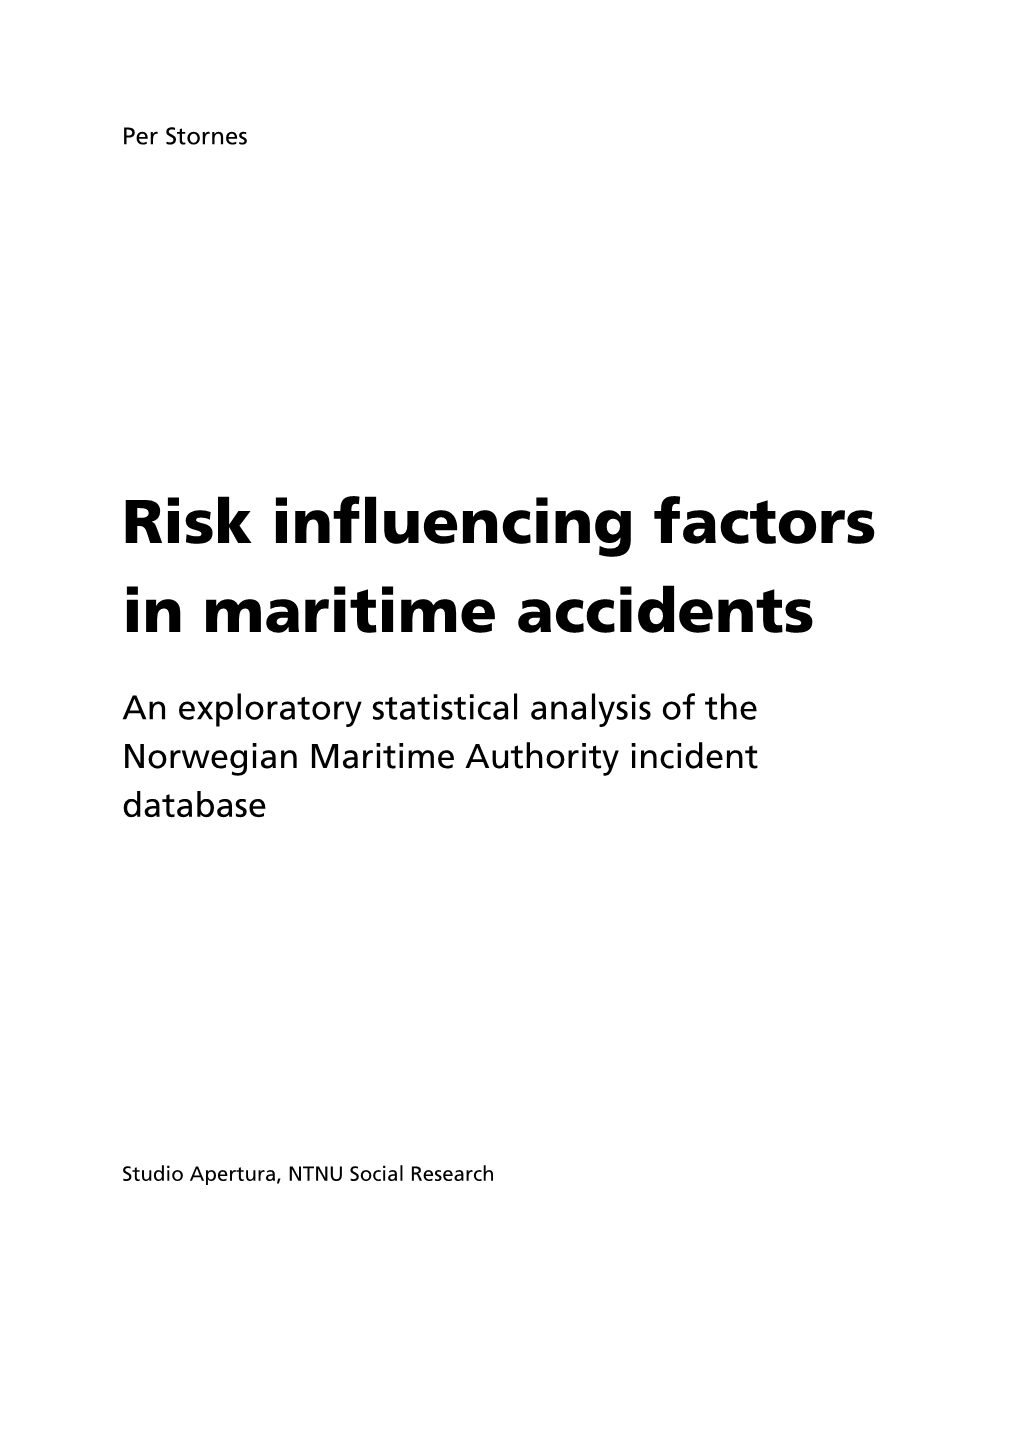 Risk Influencing Factors in Maritime Accidents